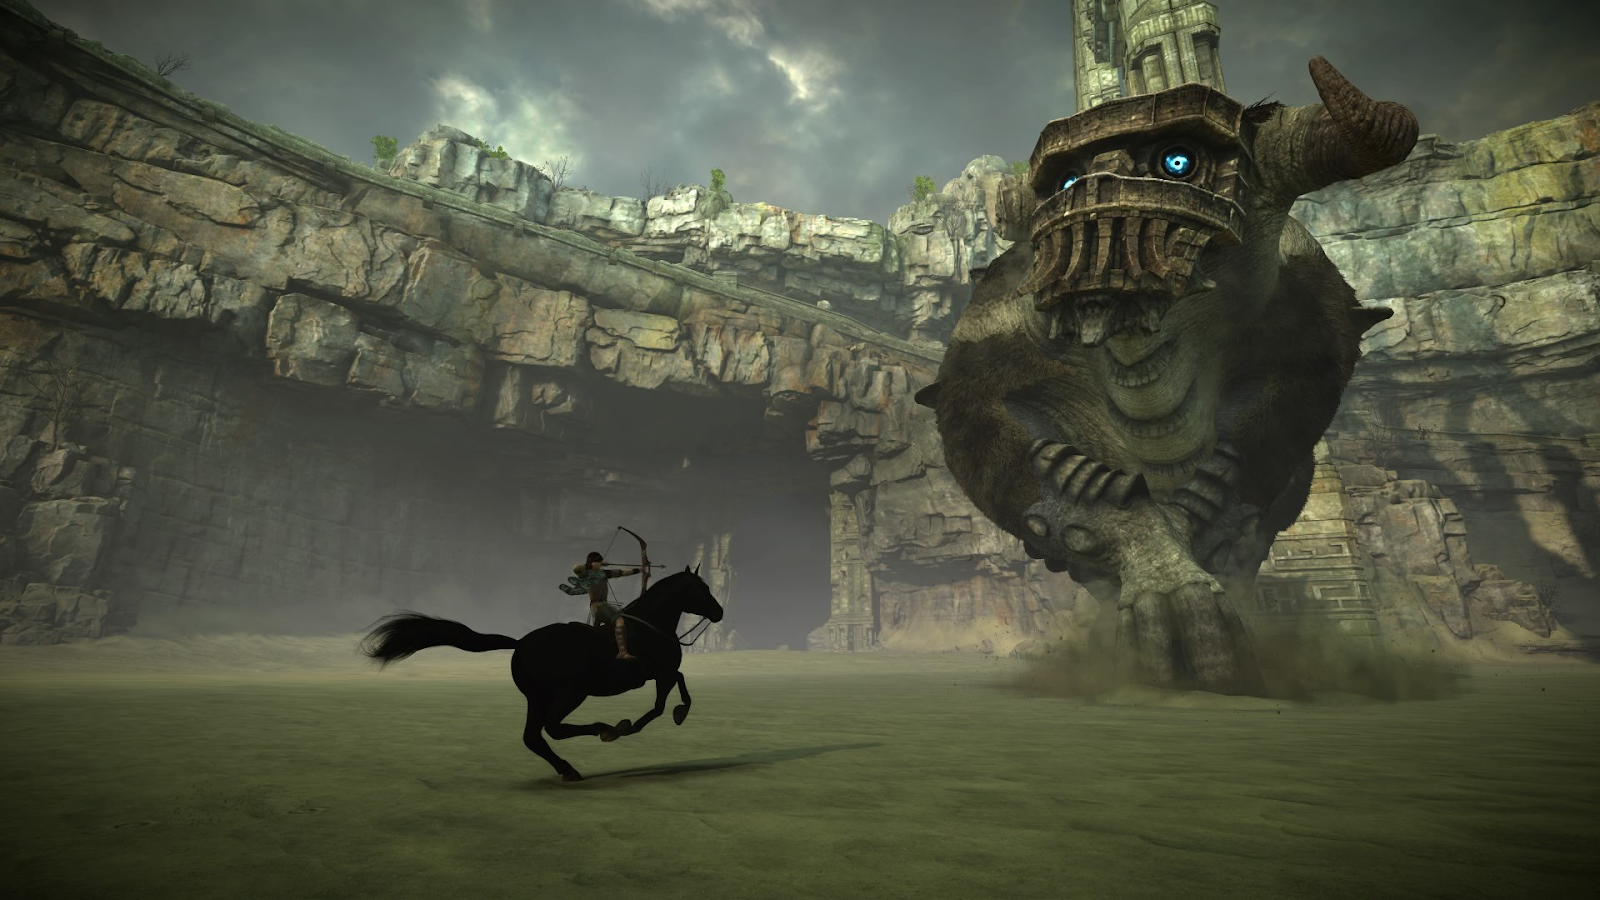 Shadow of the Colossus as an Example of Post-Modern Literature